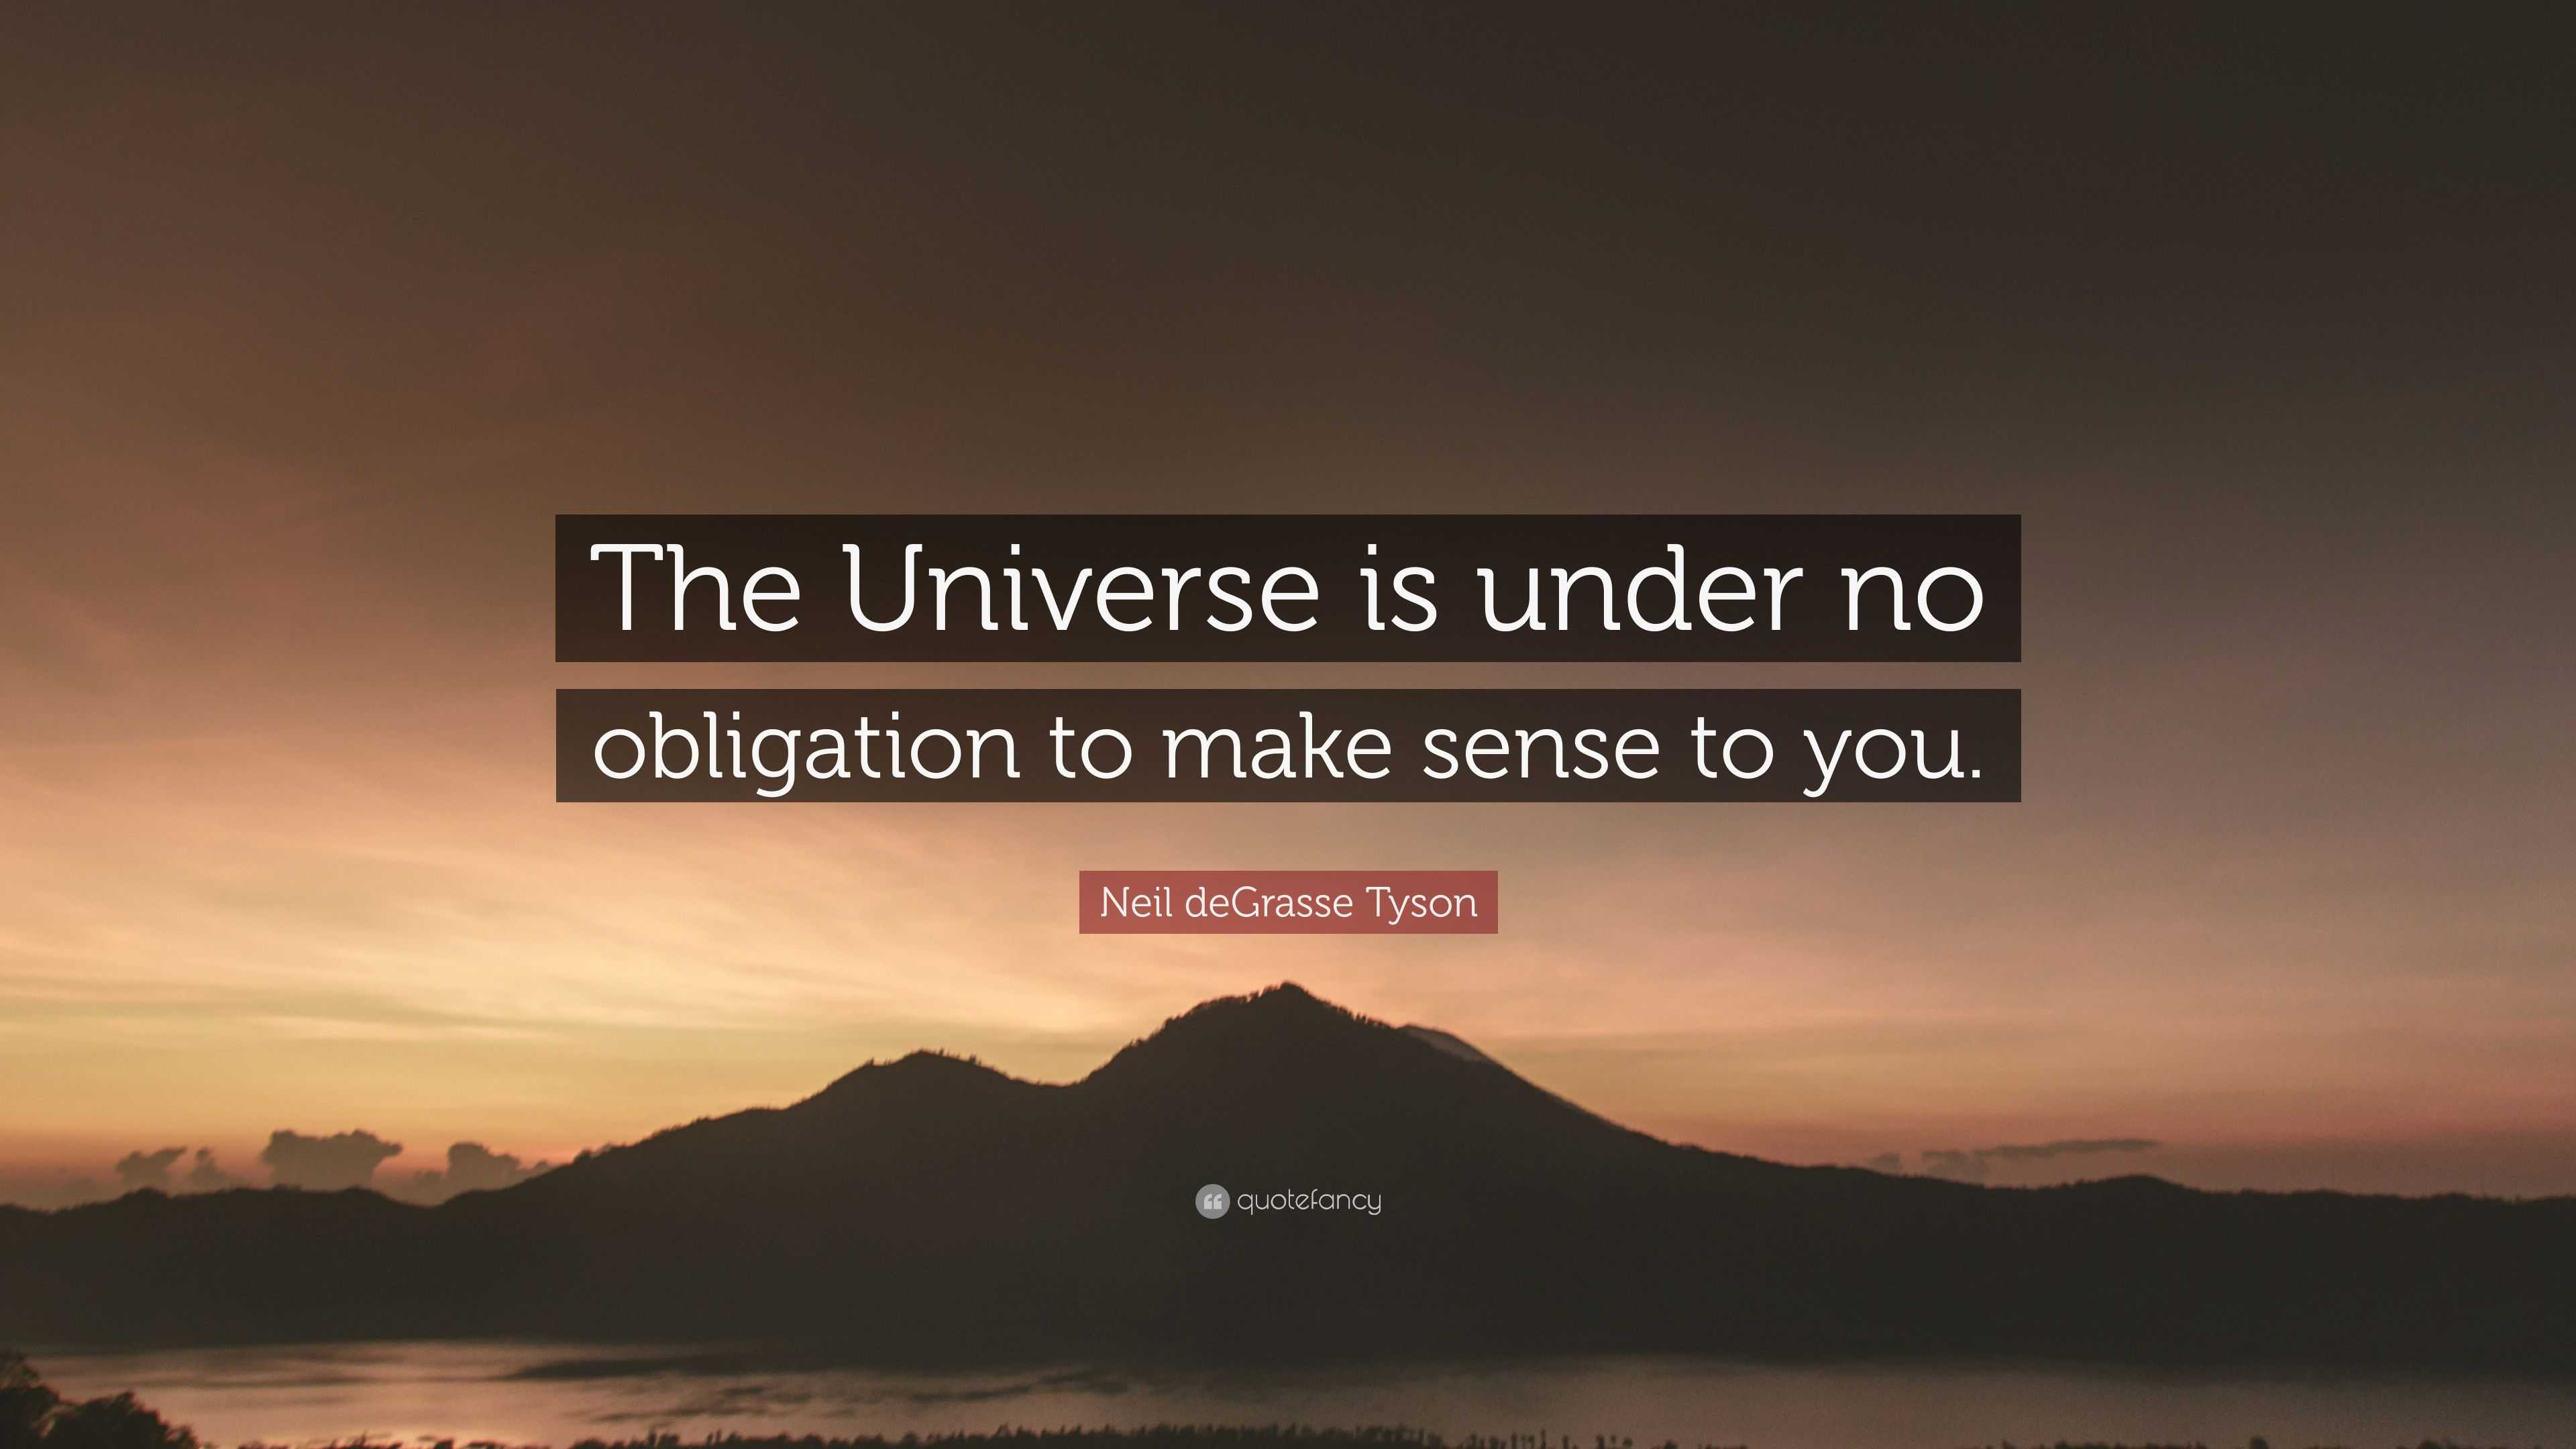 Neil deGrasse Tyson Quote: “The Universe is under no obligation to make ...